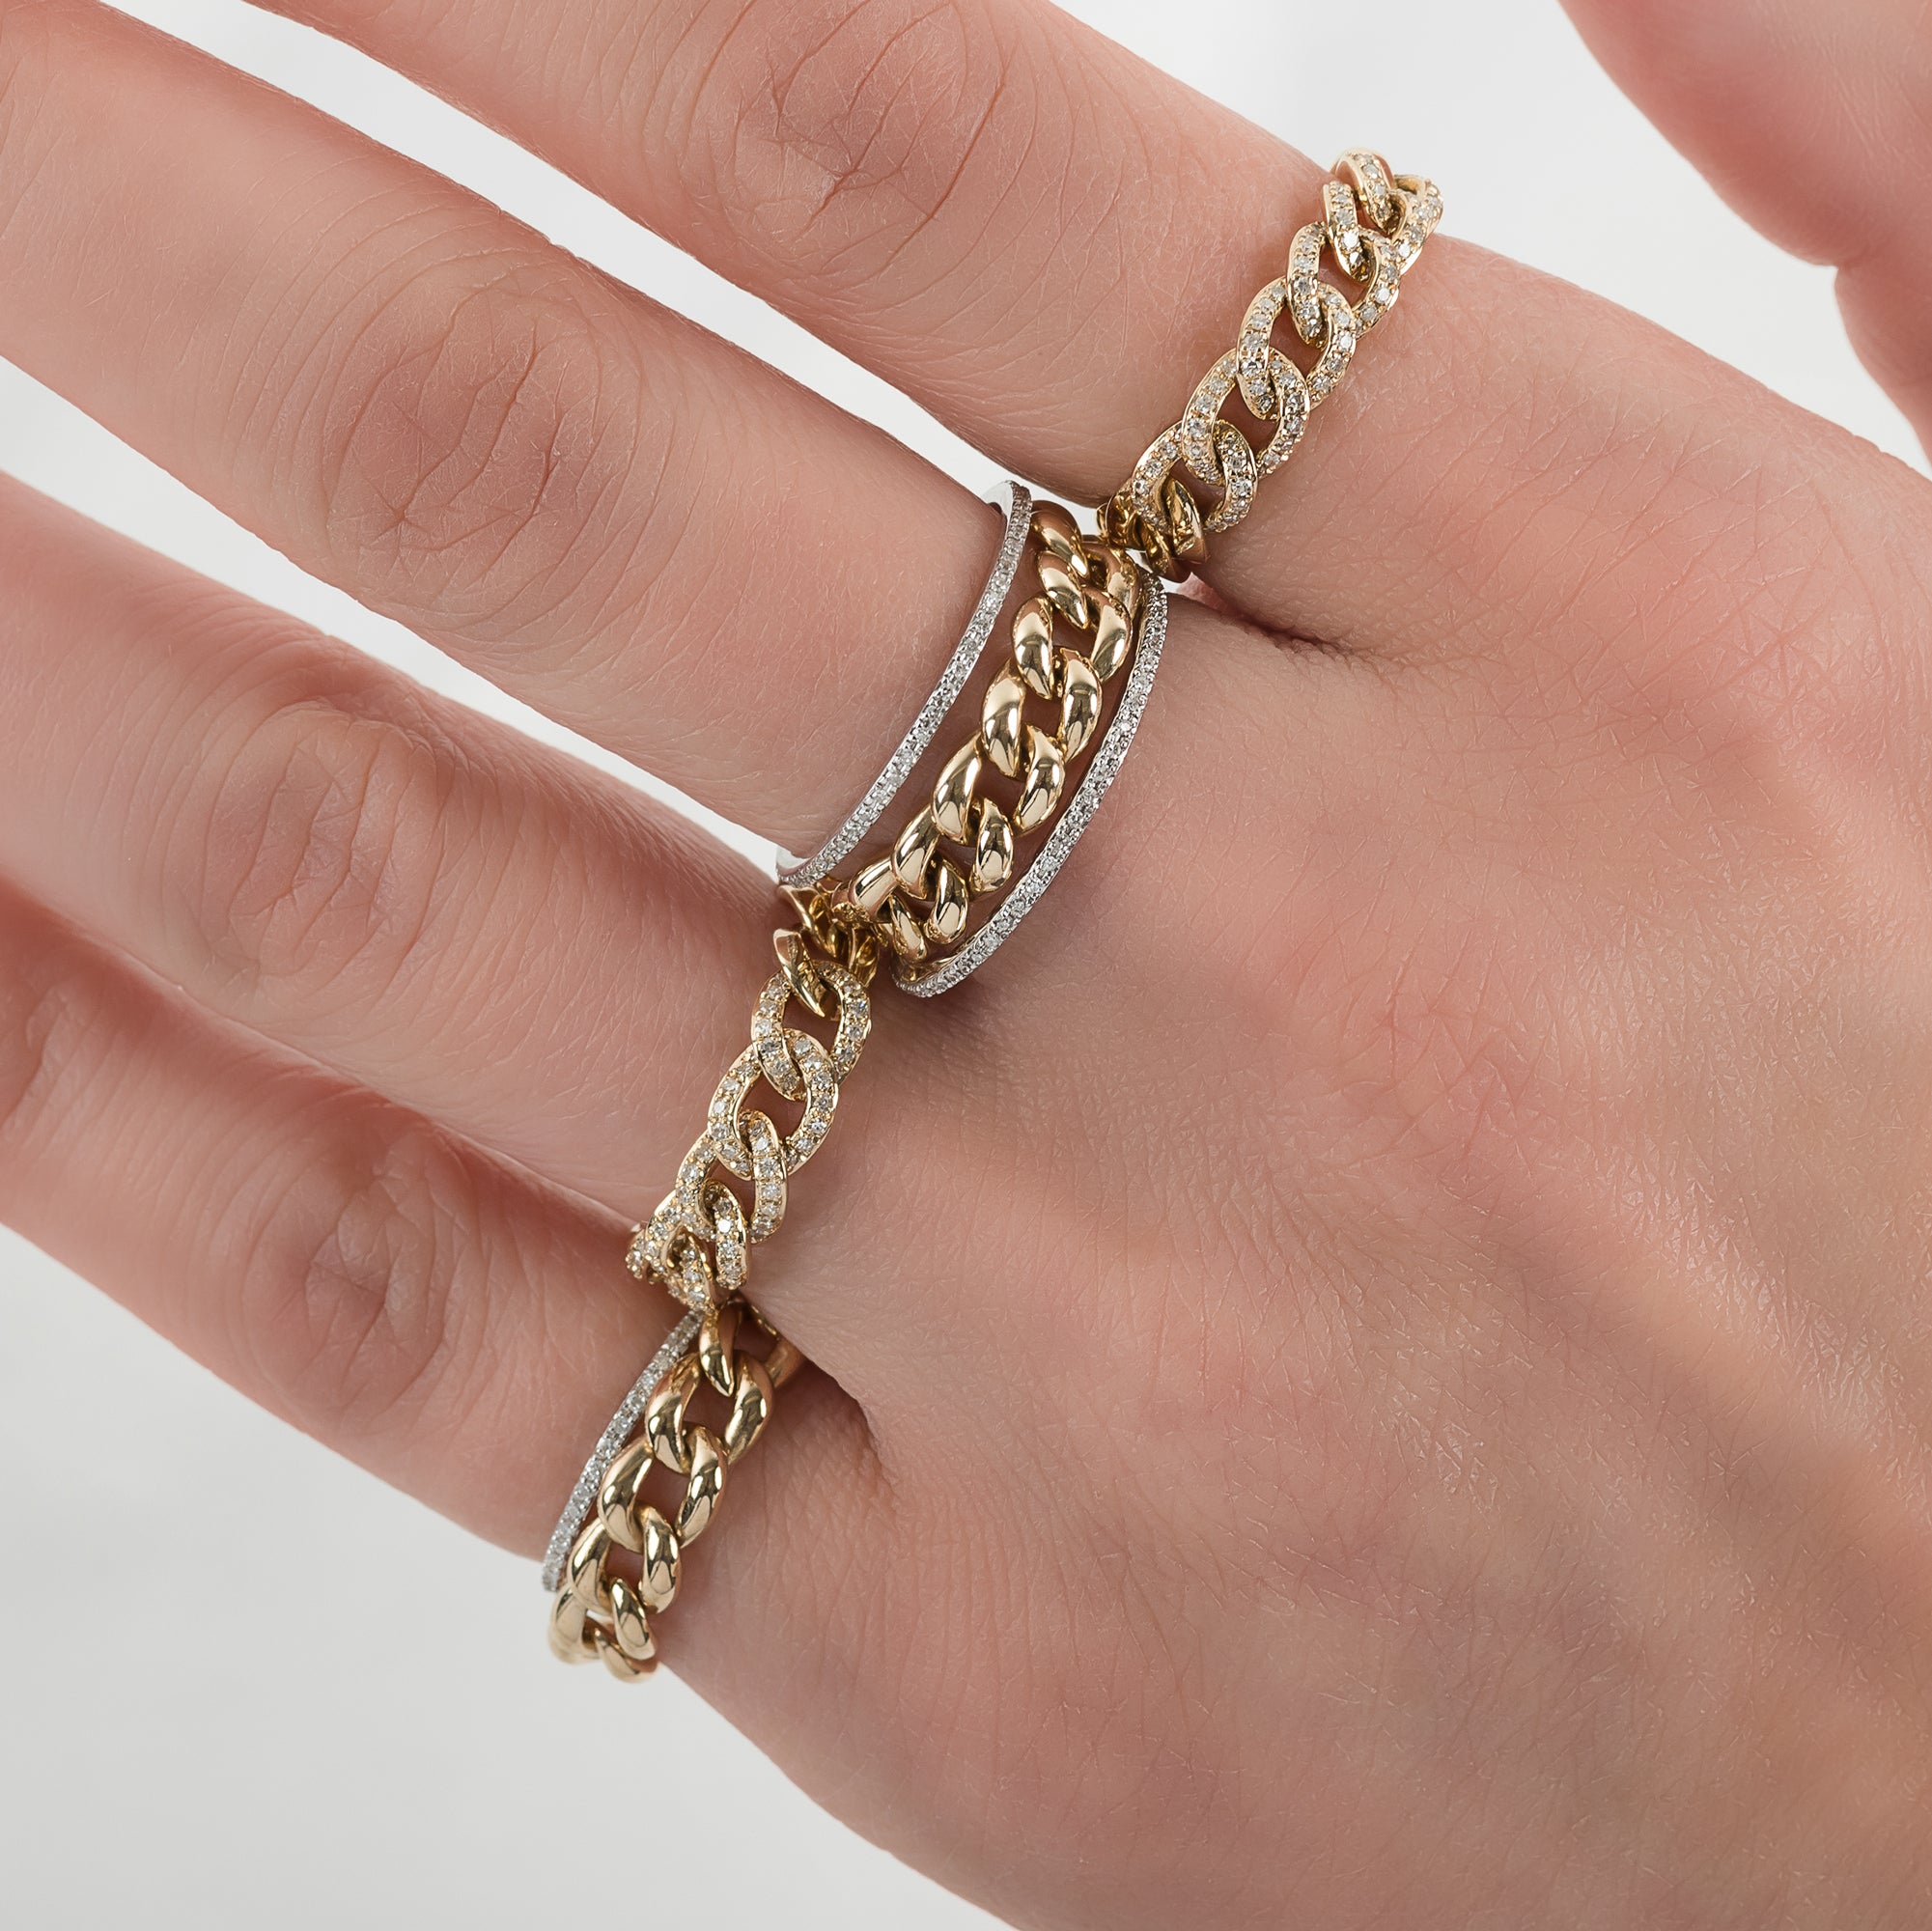 Buy 14K Gold Chain Ring, Cuban Link Ring, Gift for Women, Minimalist  Design, Daily Jewelry, Birthday Present Online in India - Etsy